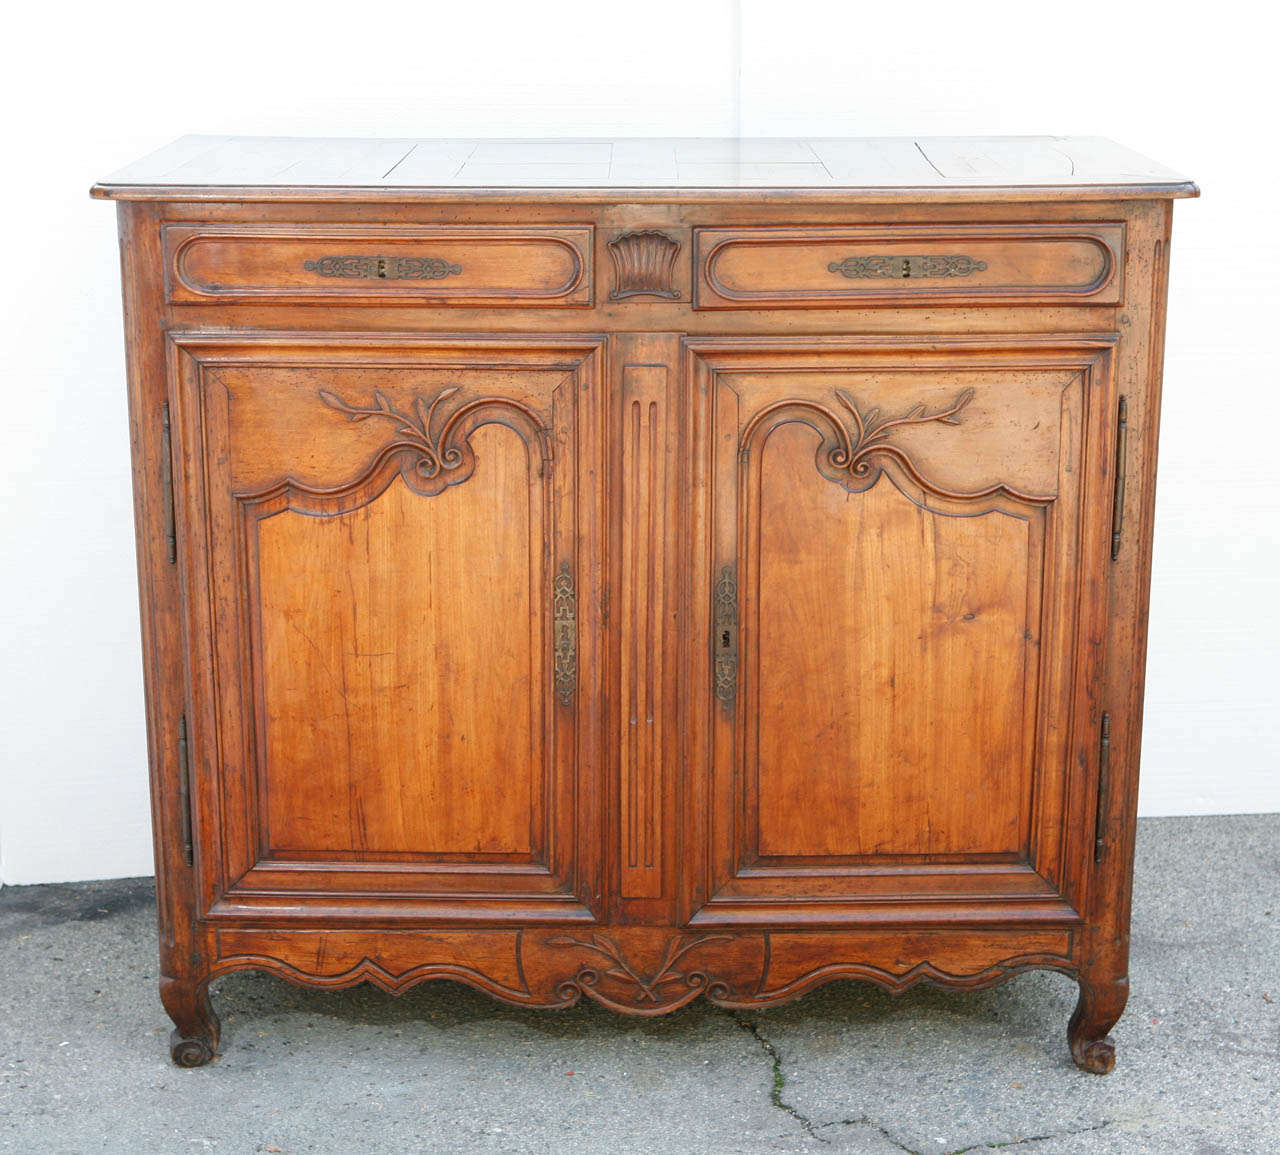 French provincial buffet/sideboard with 2 drawers and 2 doors.
All bench made in hand carved fruitwood. Original lock and replacement key. Beautiful, rich patina.Very good, small cutout on inner shelf, all original hardware.
Fruitwood exterior